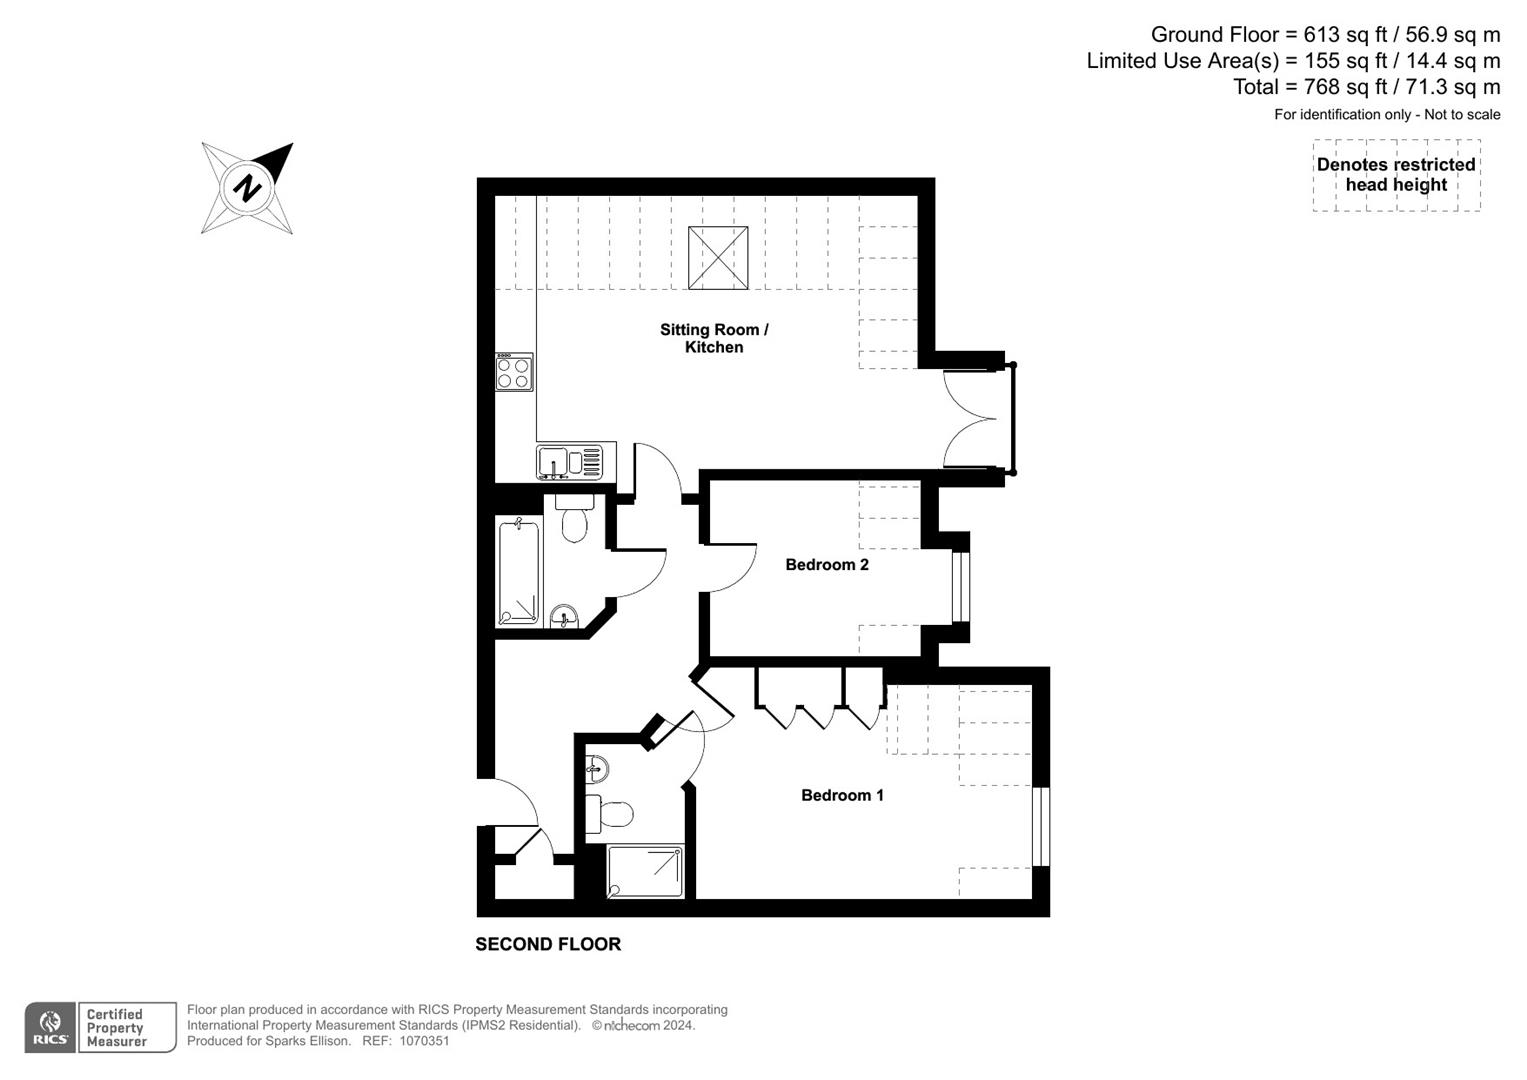 Oakleigh Place, Winchester Road, Chandler’s Ford floorplan